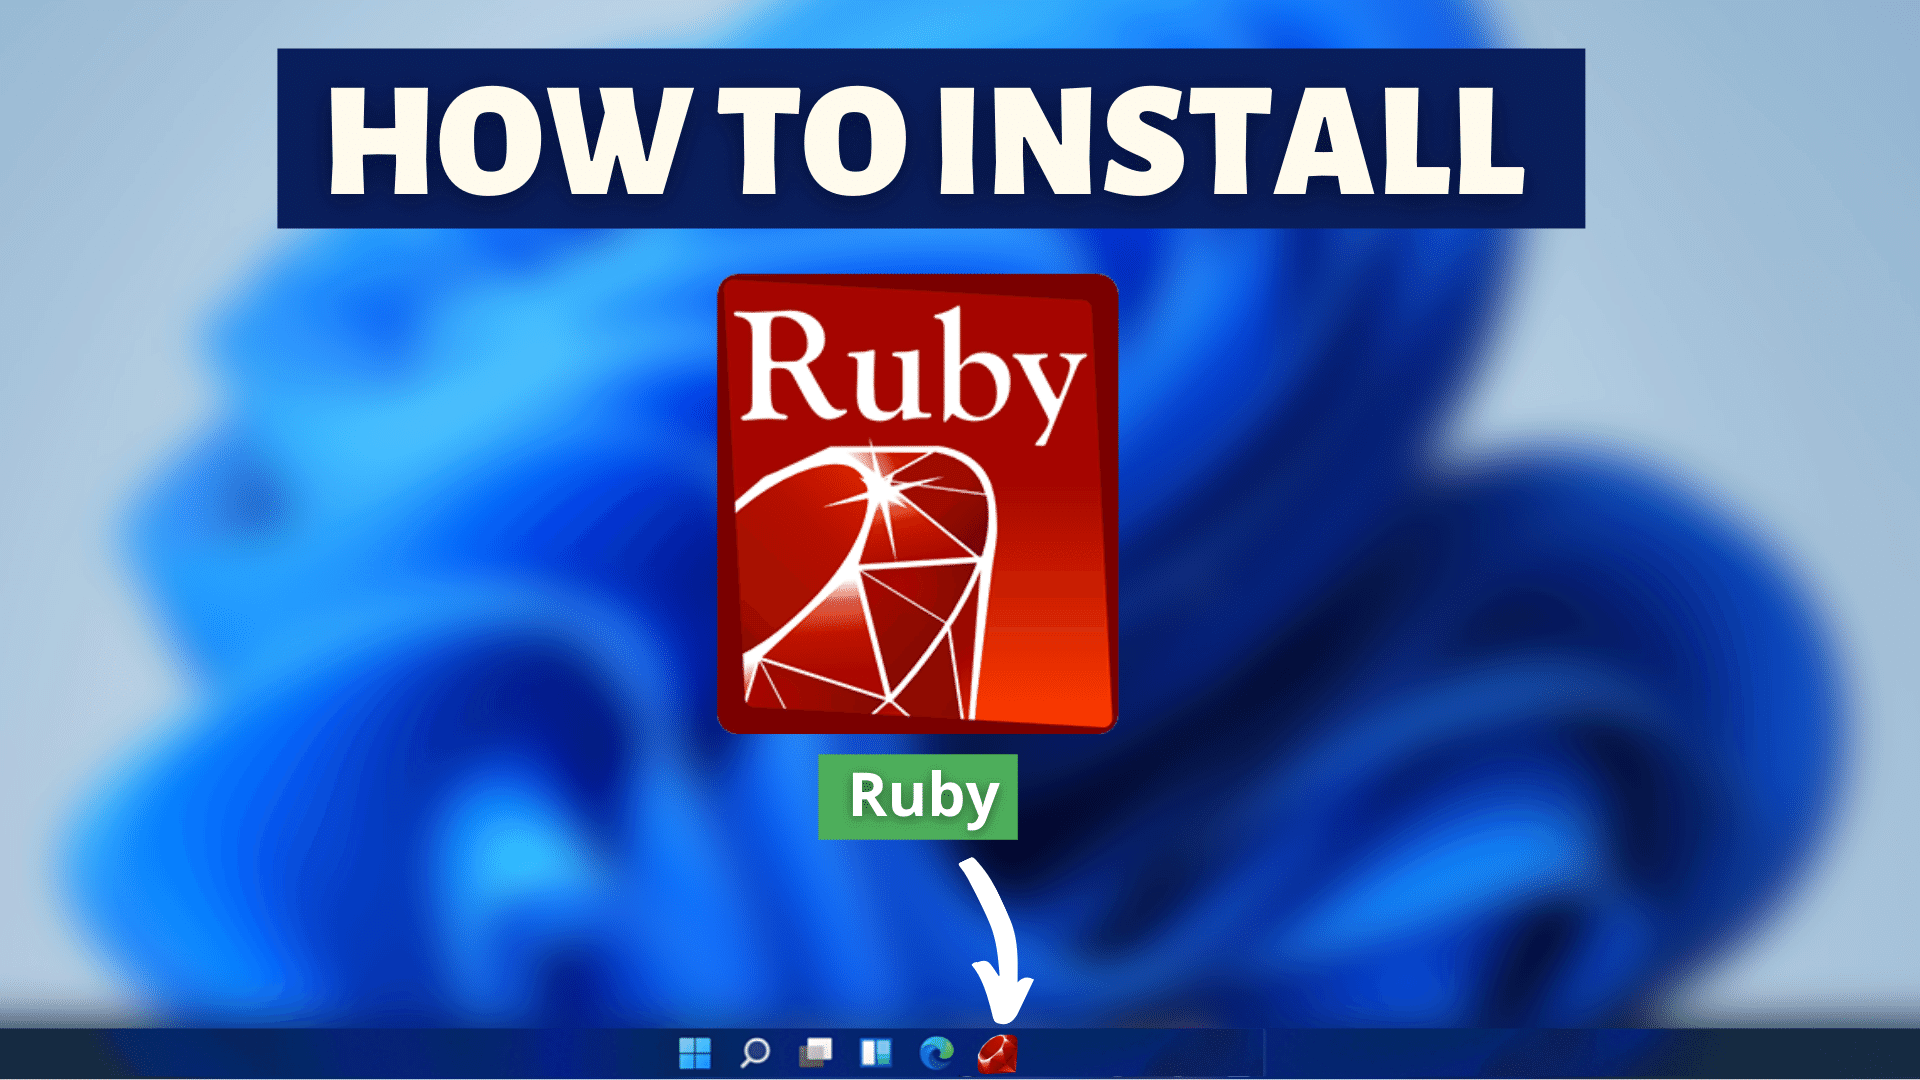 Install Ruby on Windows: Everything You Need to Get Going